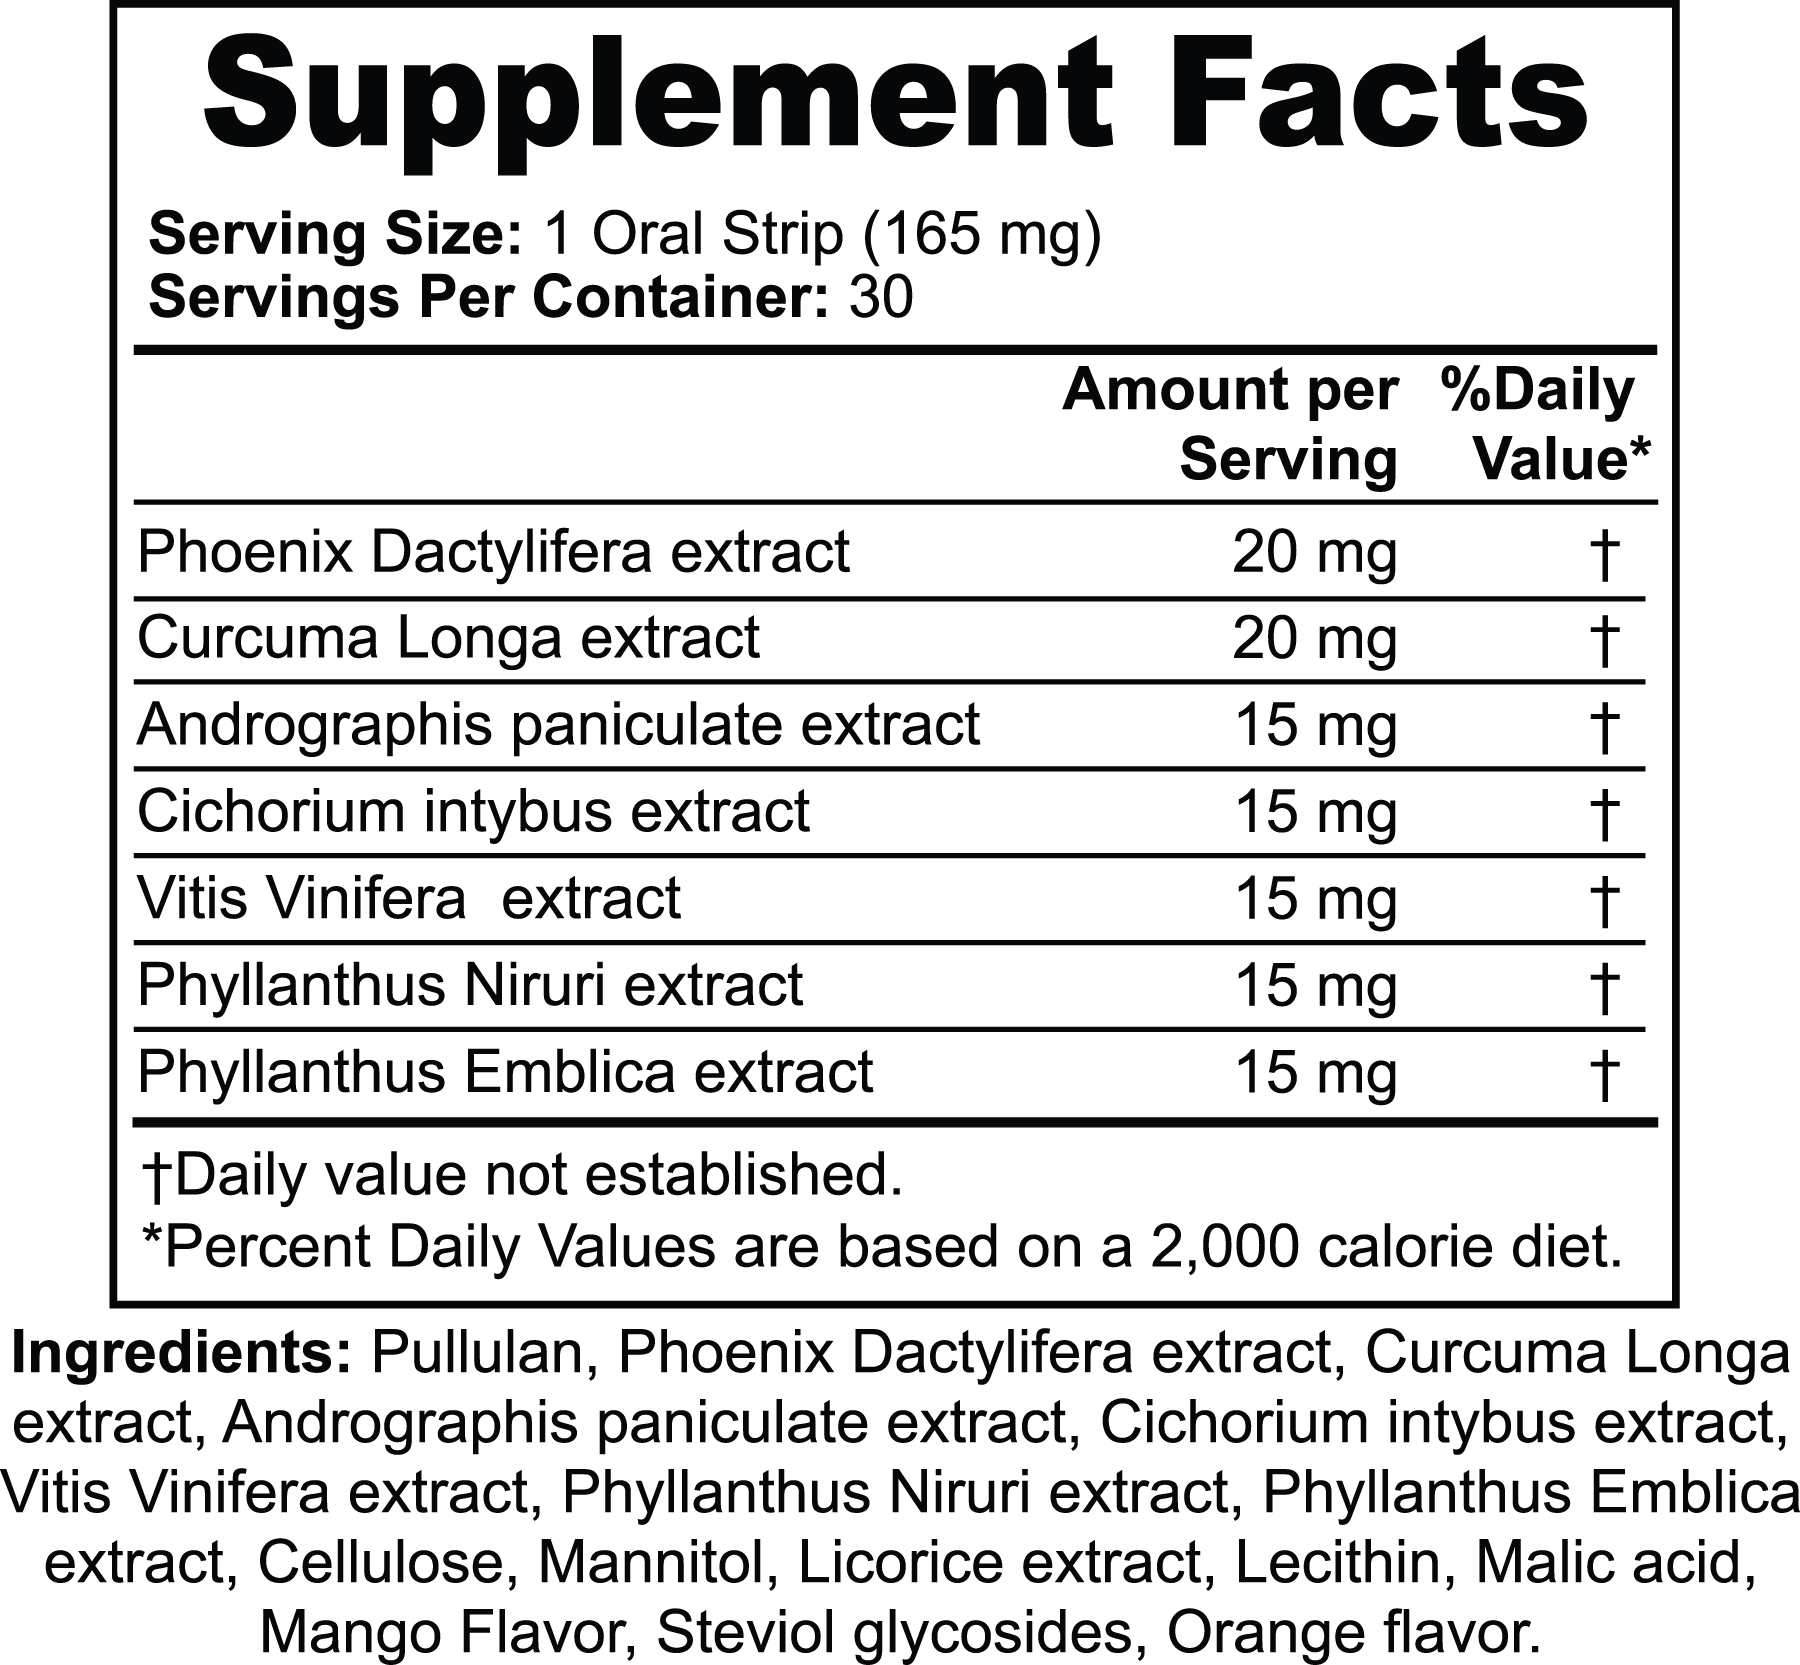 Supplement facts for hangover strips